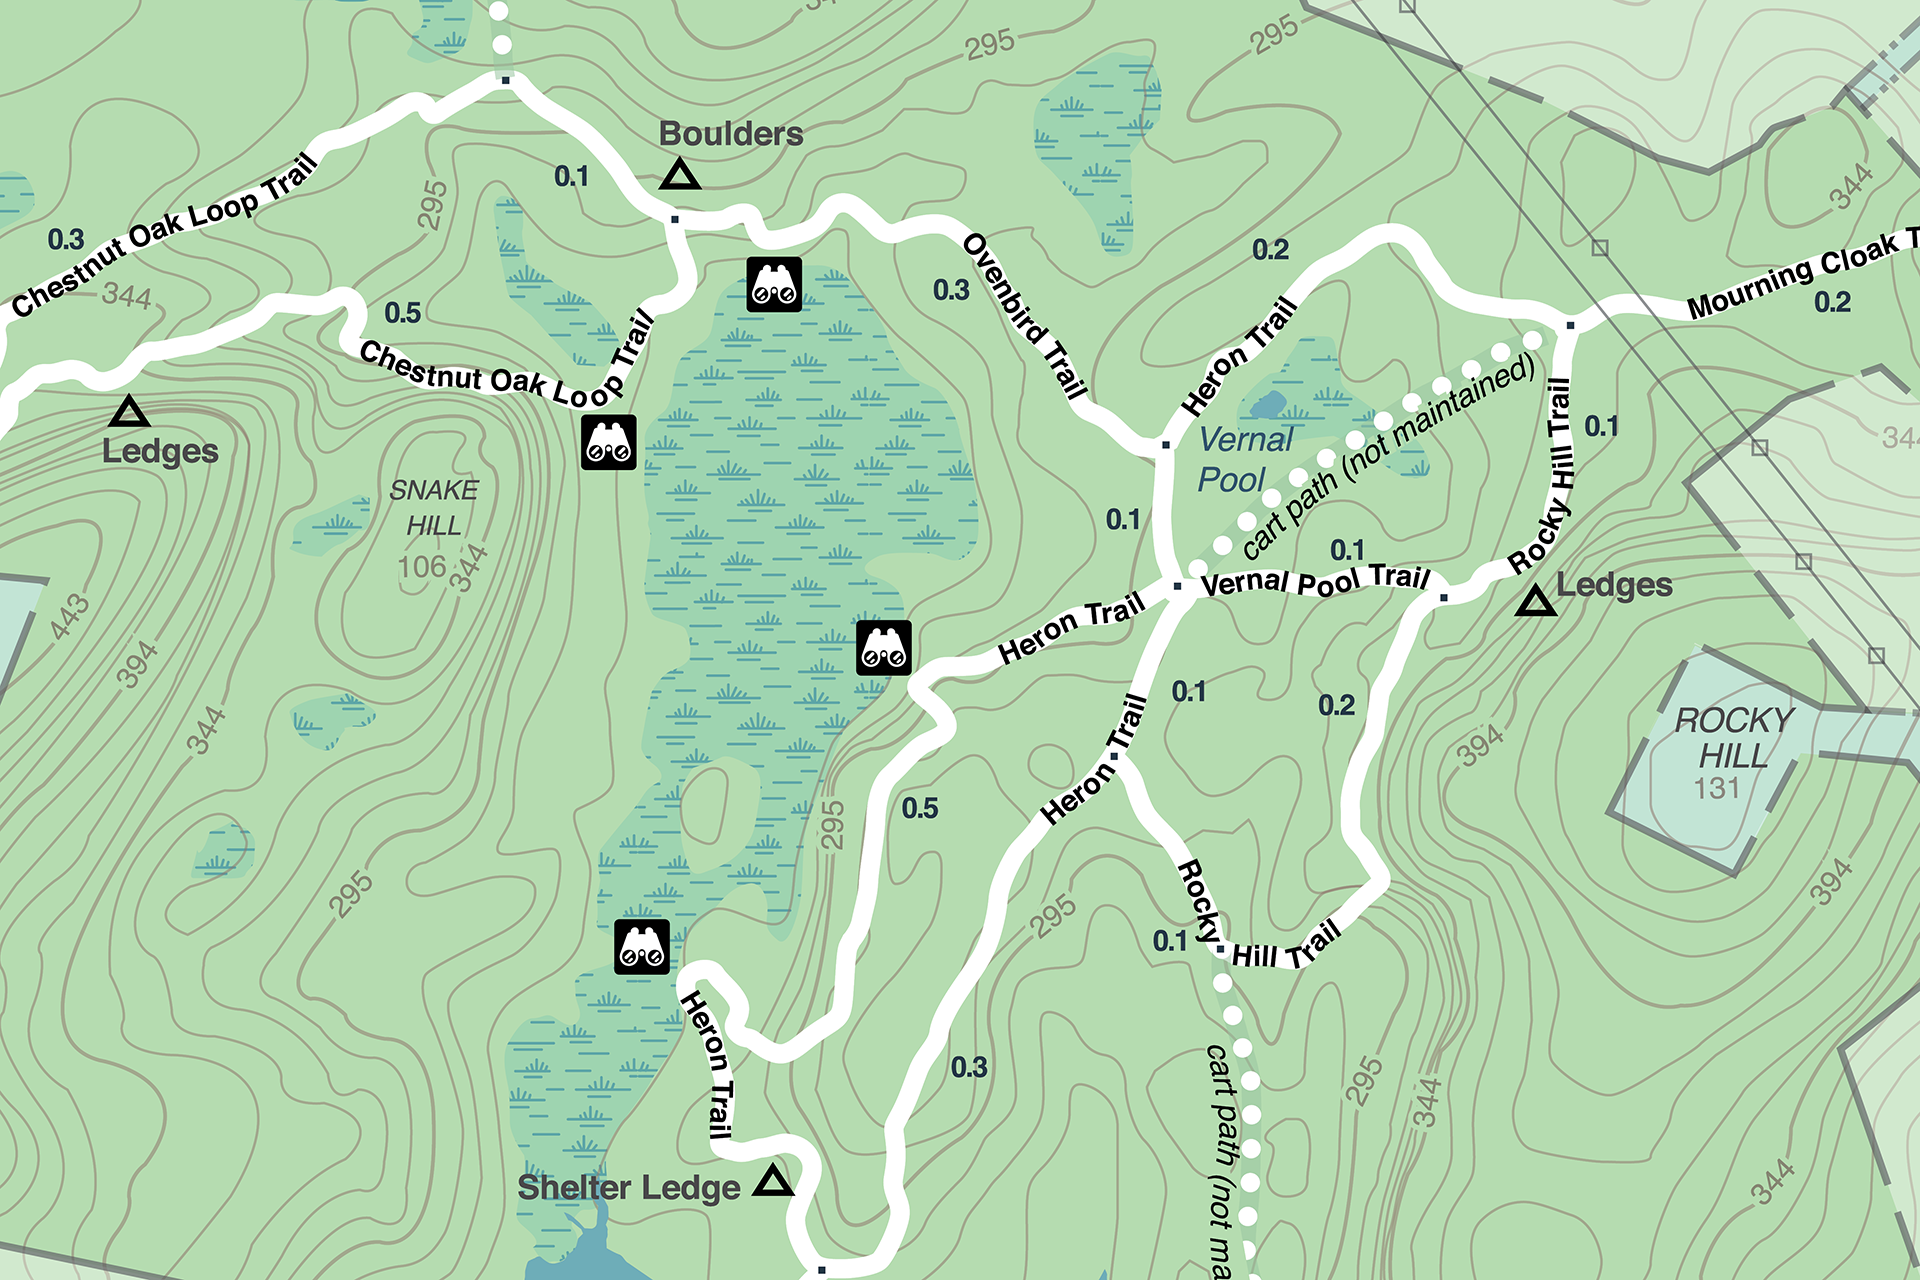 Thumbnail of Rocky Hill's downloadable trail map